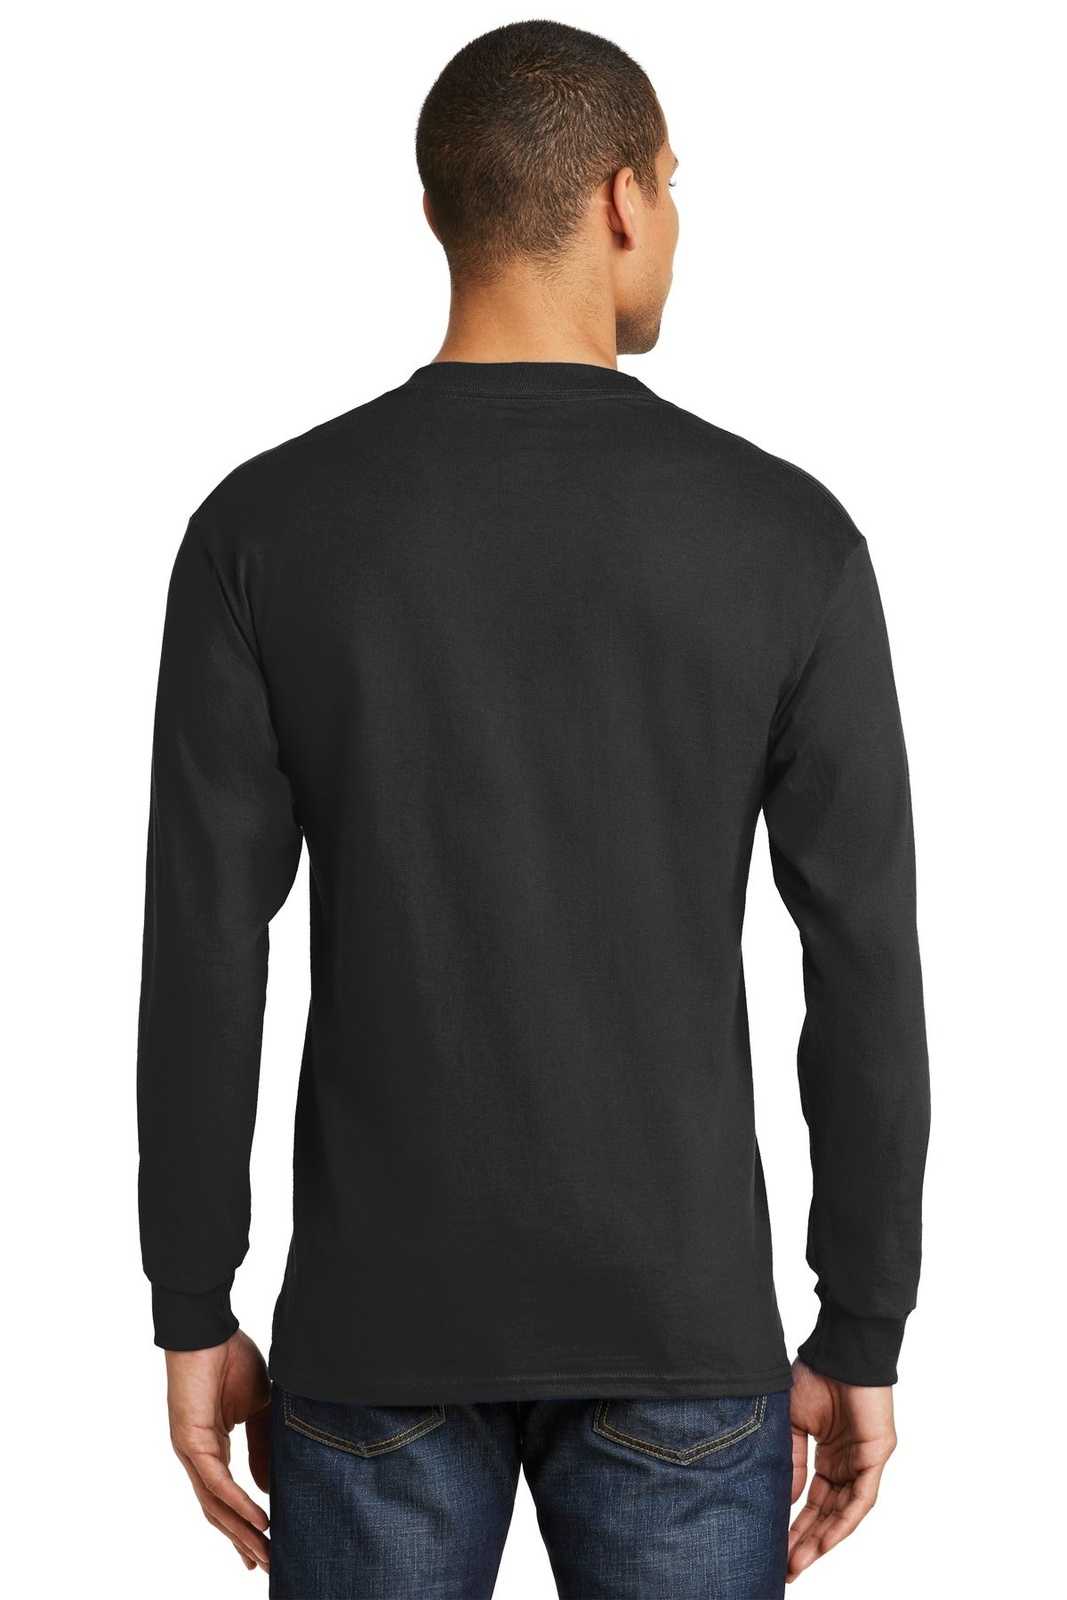 Hanes 5186 Beefy-T 100% Cotton Long Sleeve T-Shirt - Black - HIT a Double